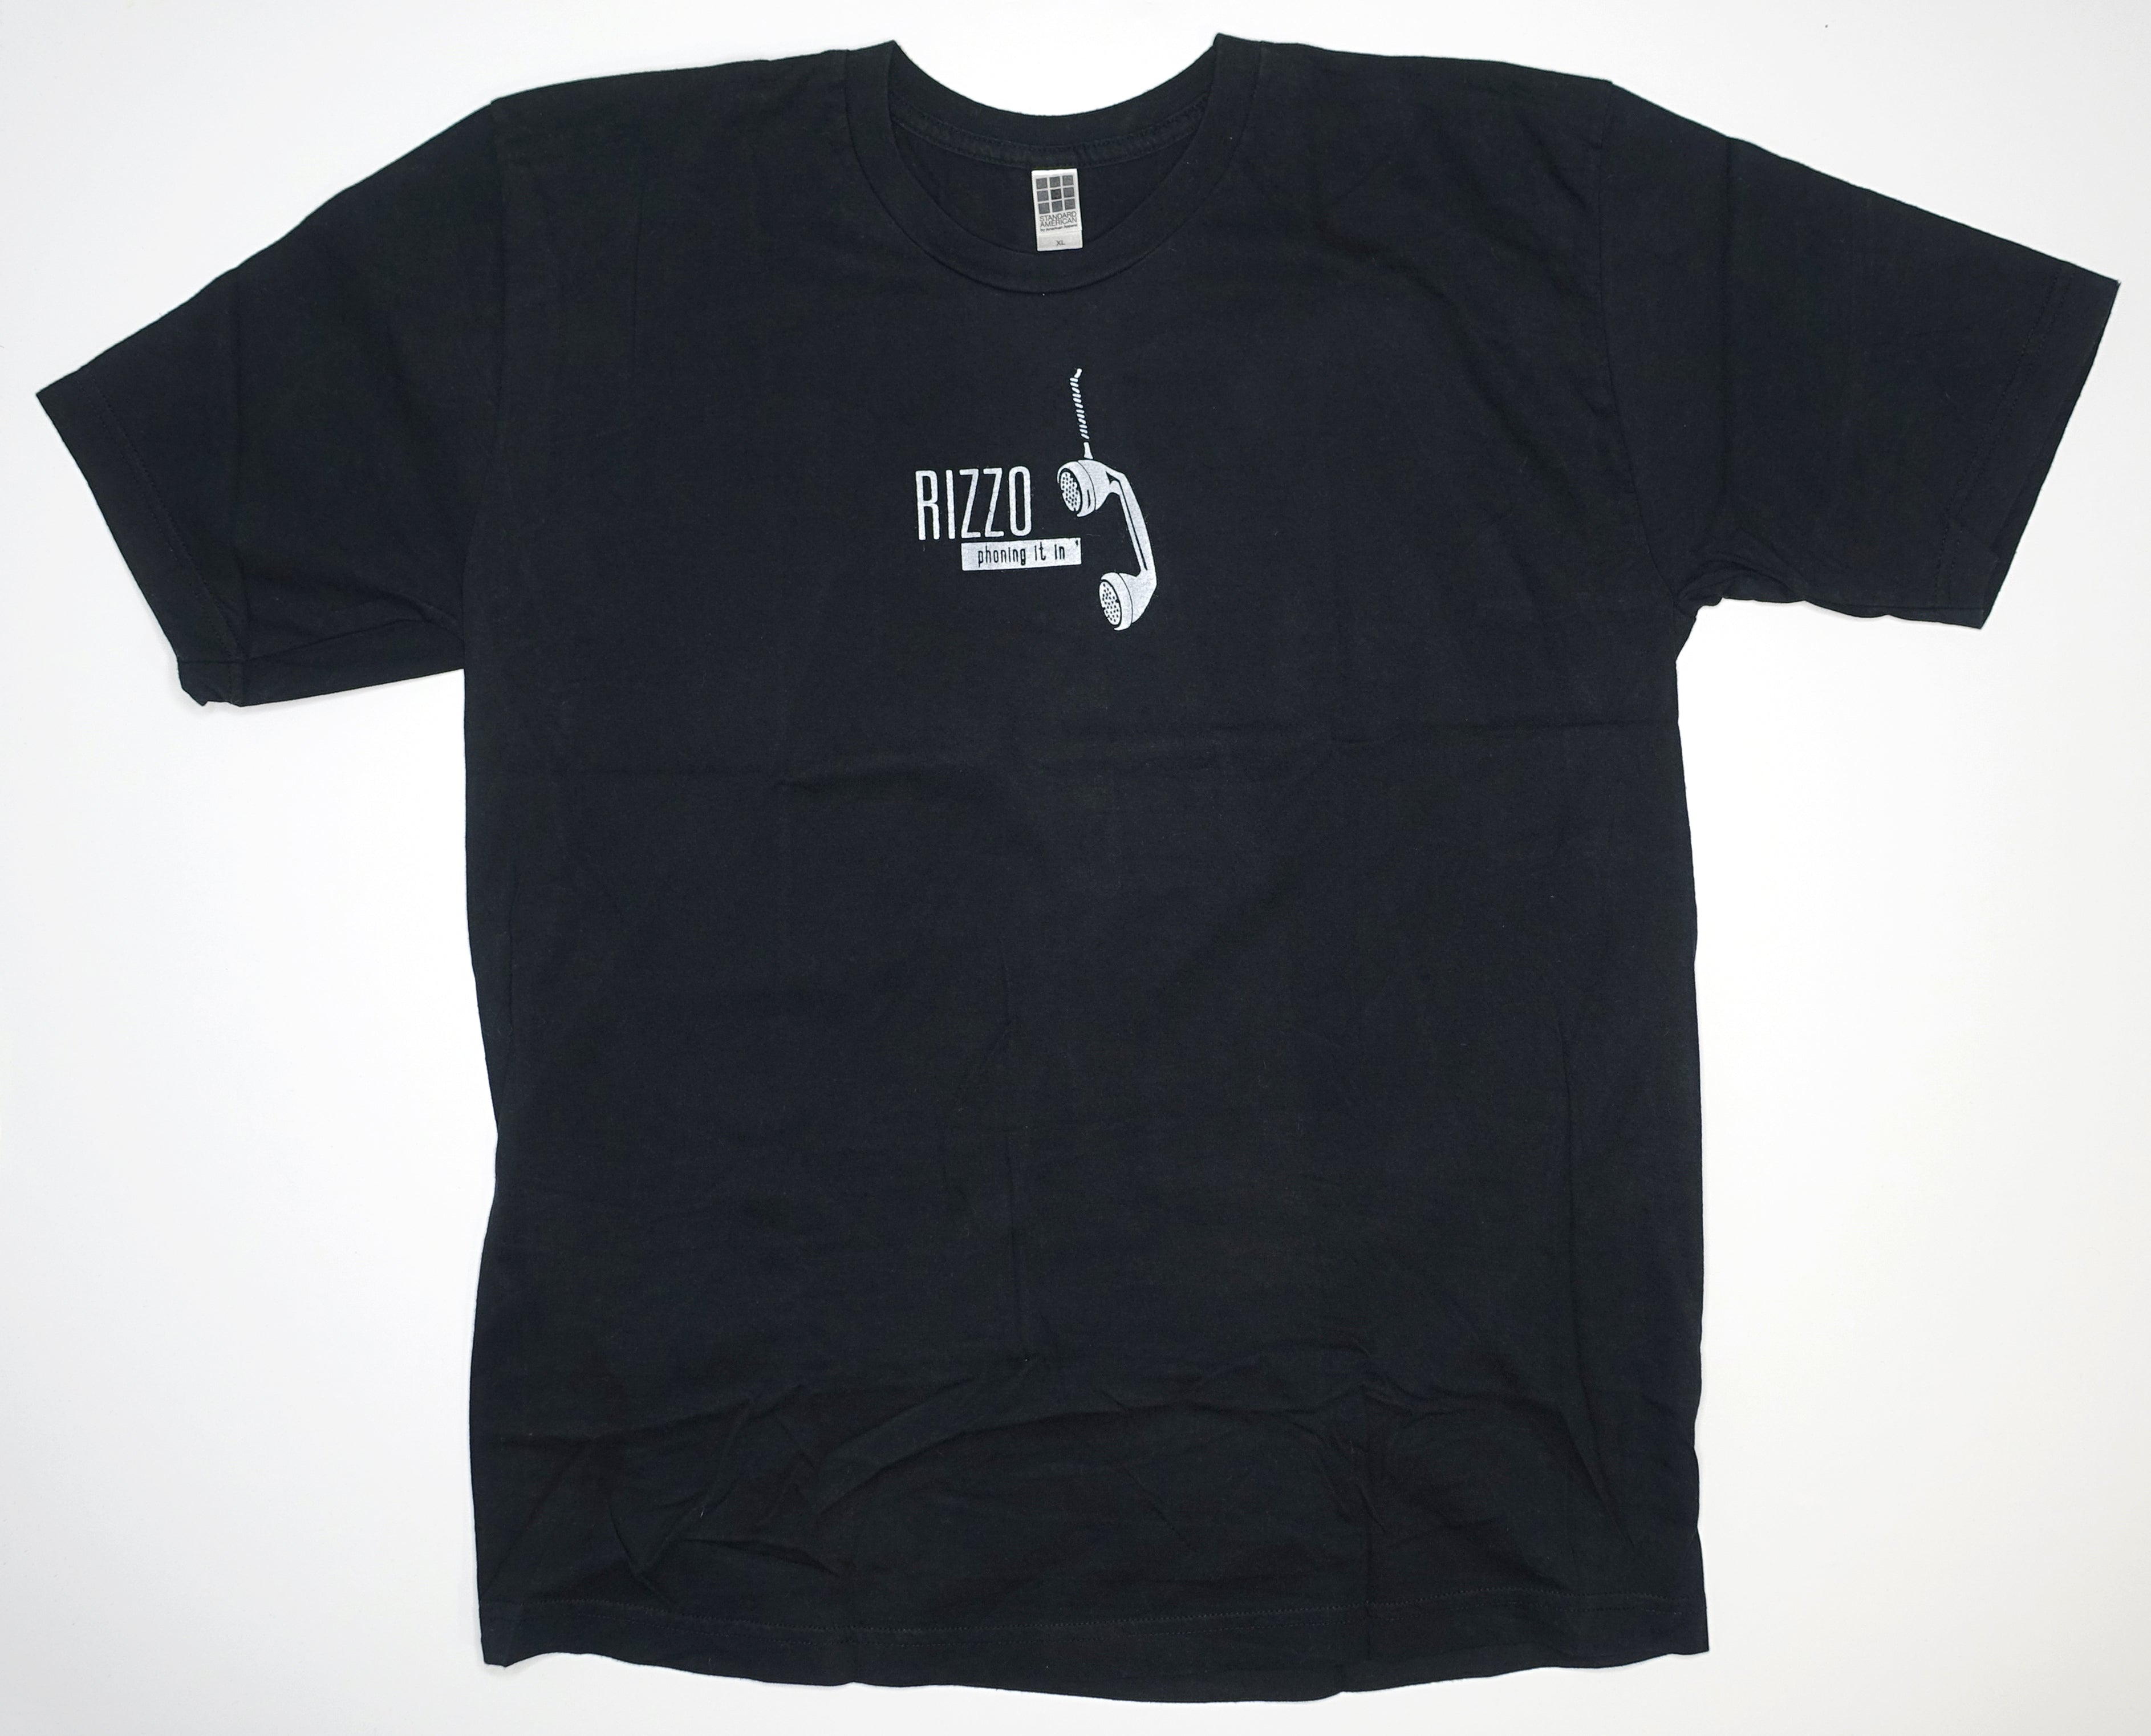 Rizzo - Phoning It In.. 2001 Tour Shirt Size XL